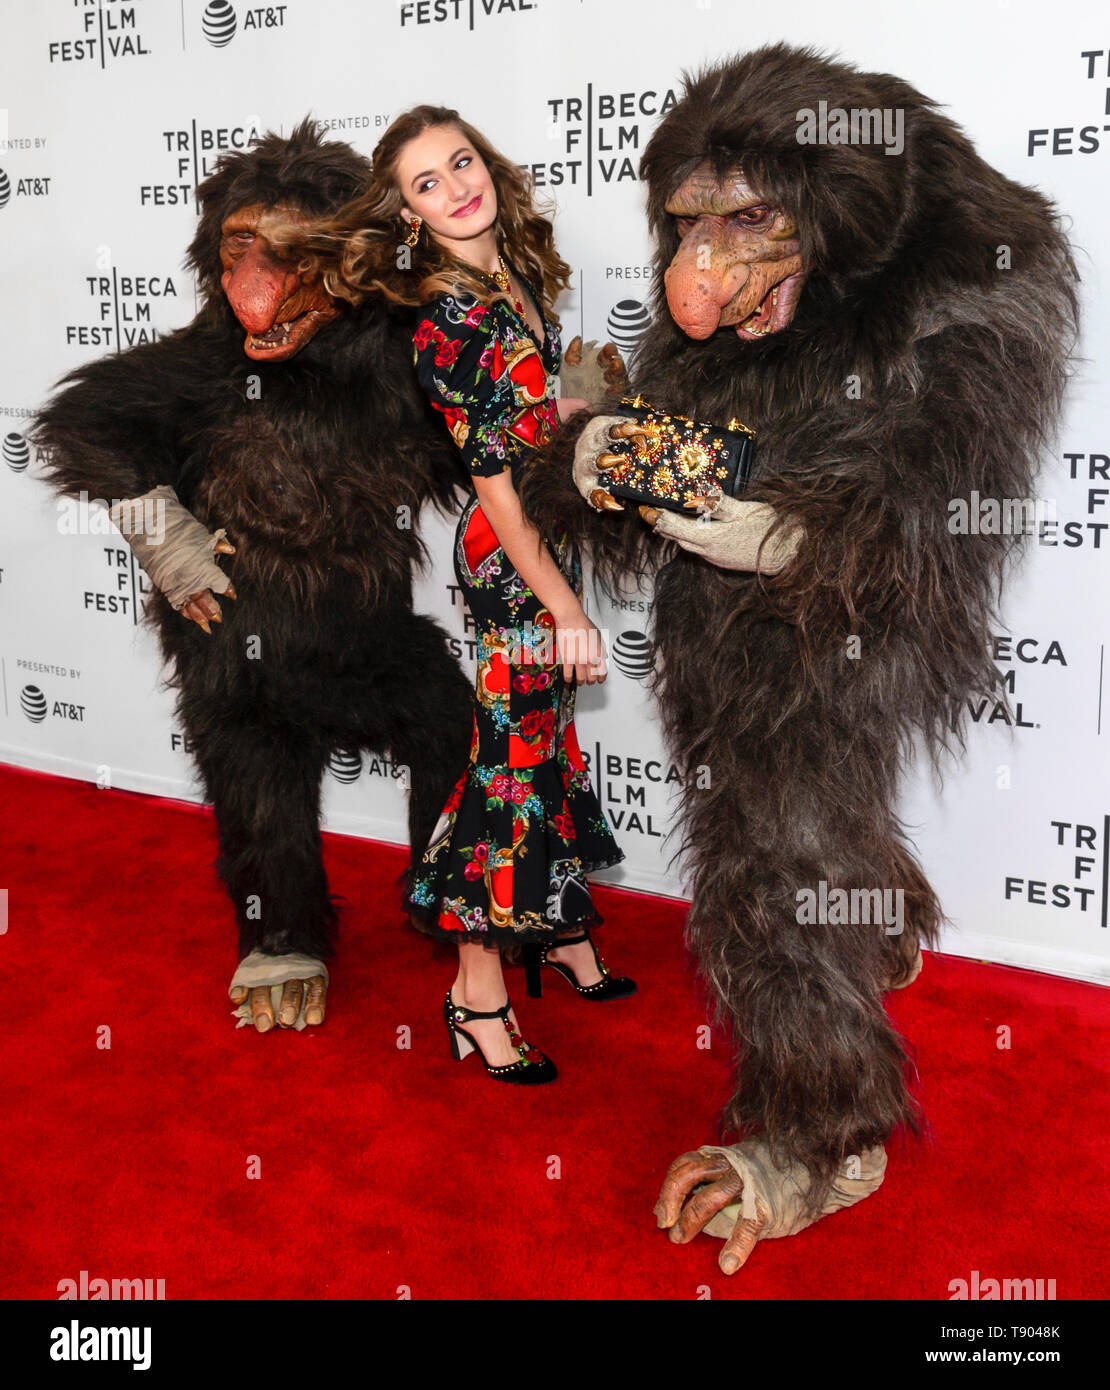 New York, NY - April 27, 2019: Grumblers - Boomer and Morse and Nicole Elizabeth Berger attend the premiere of the 'The Place of No Words' during the  Stock Photo